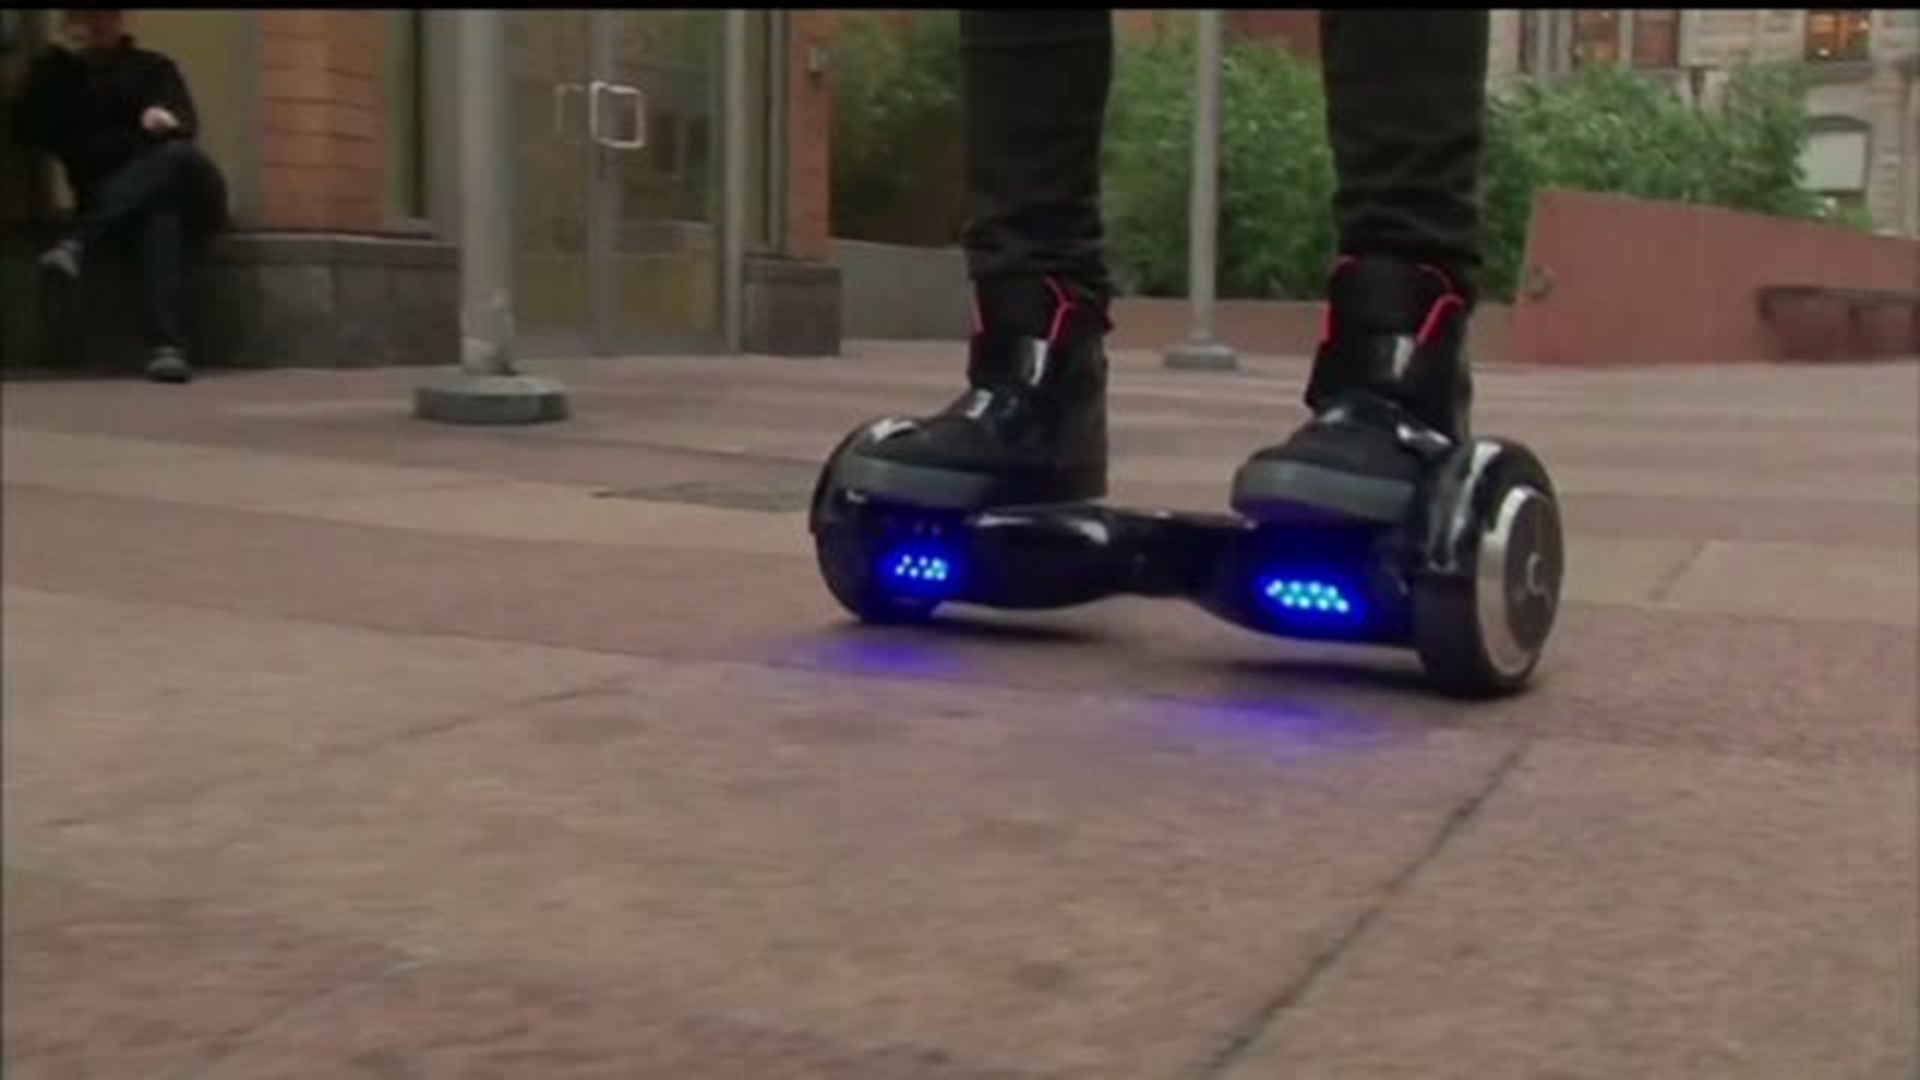 Colleges ban hoverboards on campus